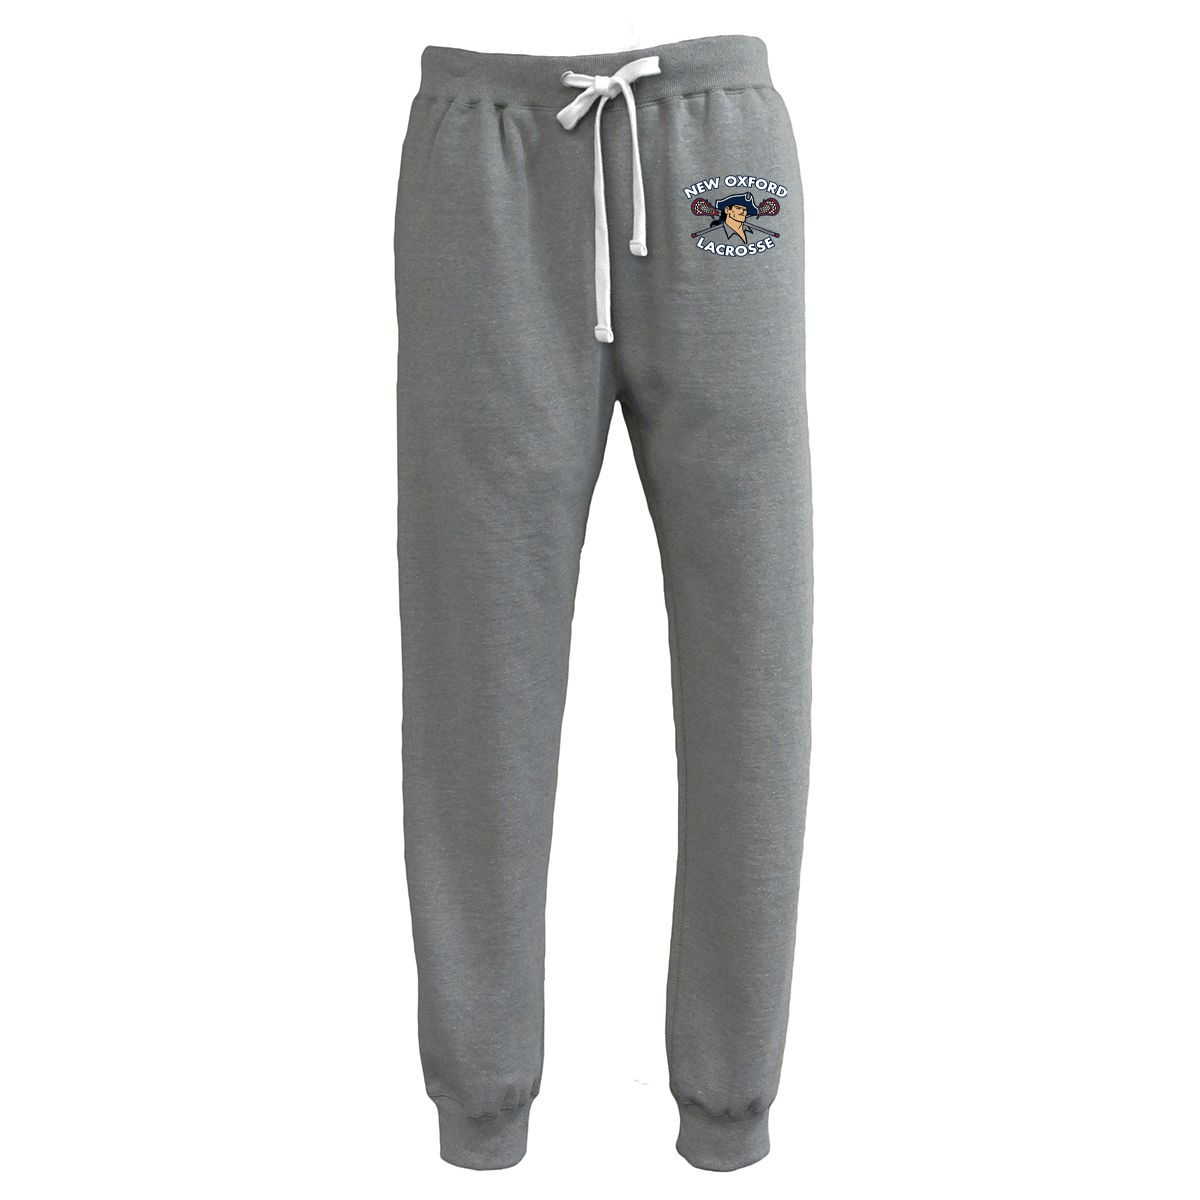 New Oxford HS Lacrosse Joggers